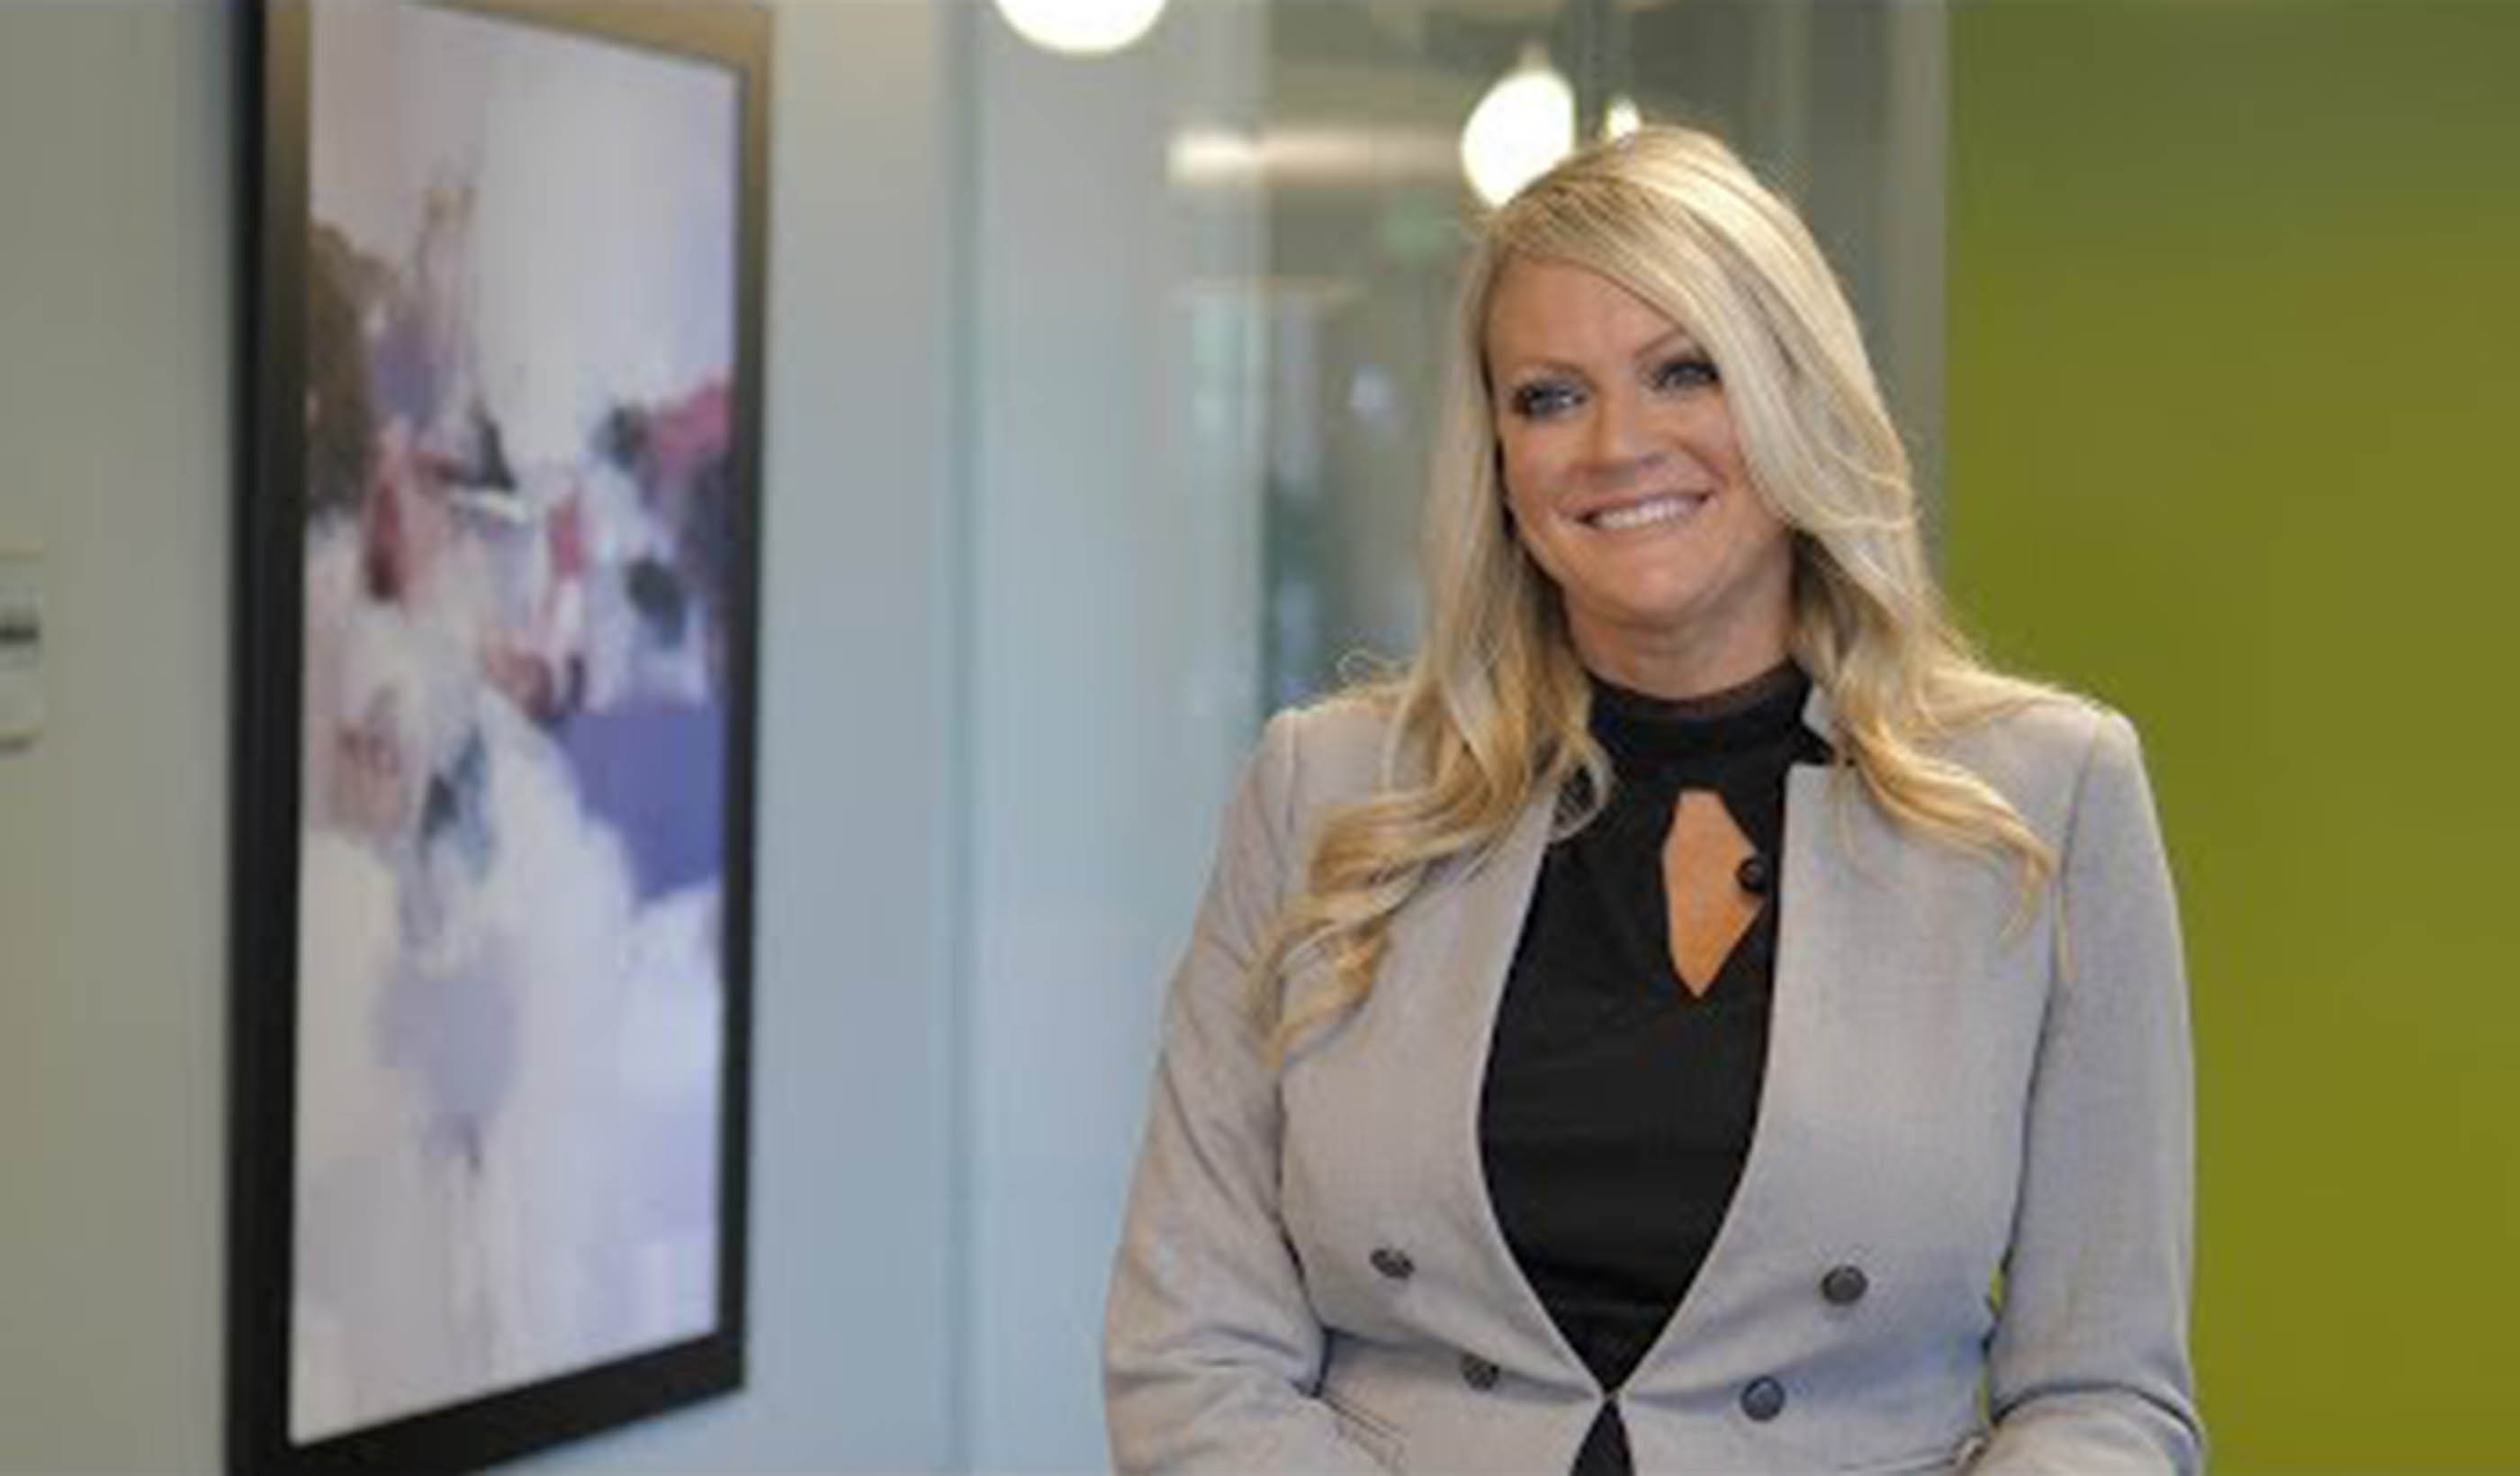 April Vance – The sky is the limit at Stantec